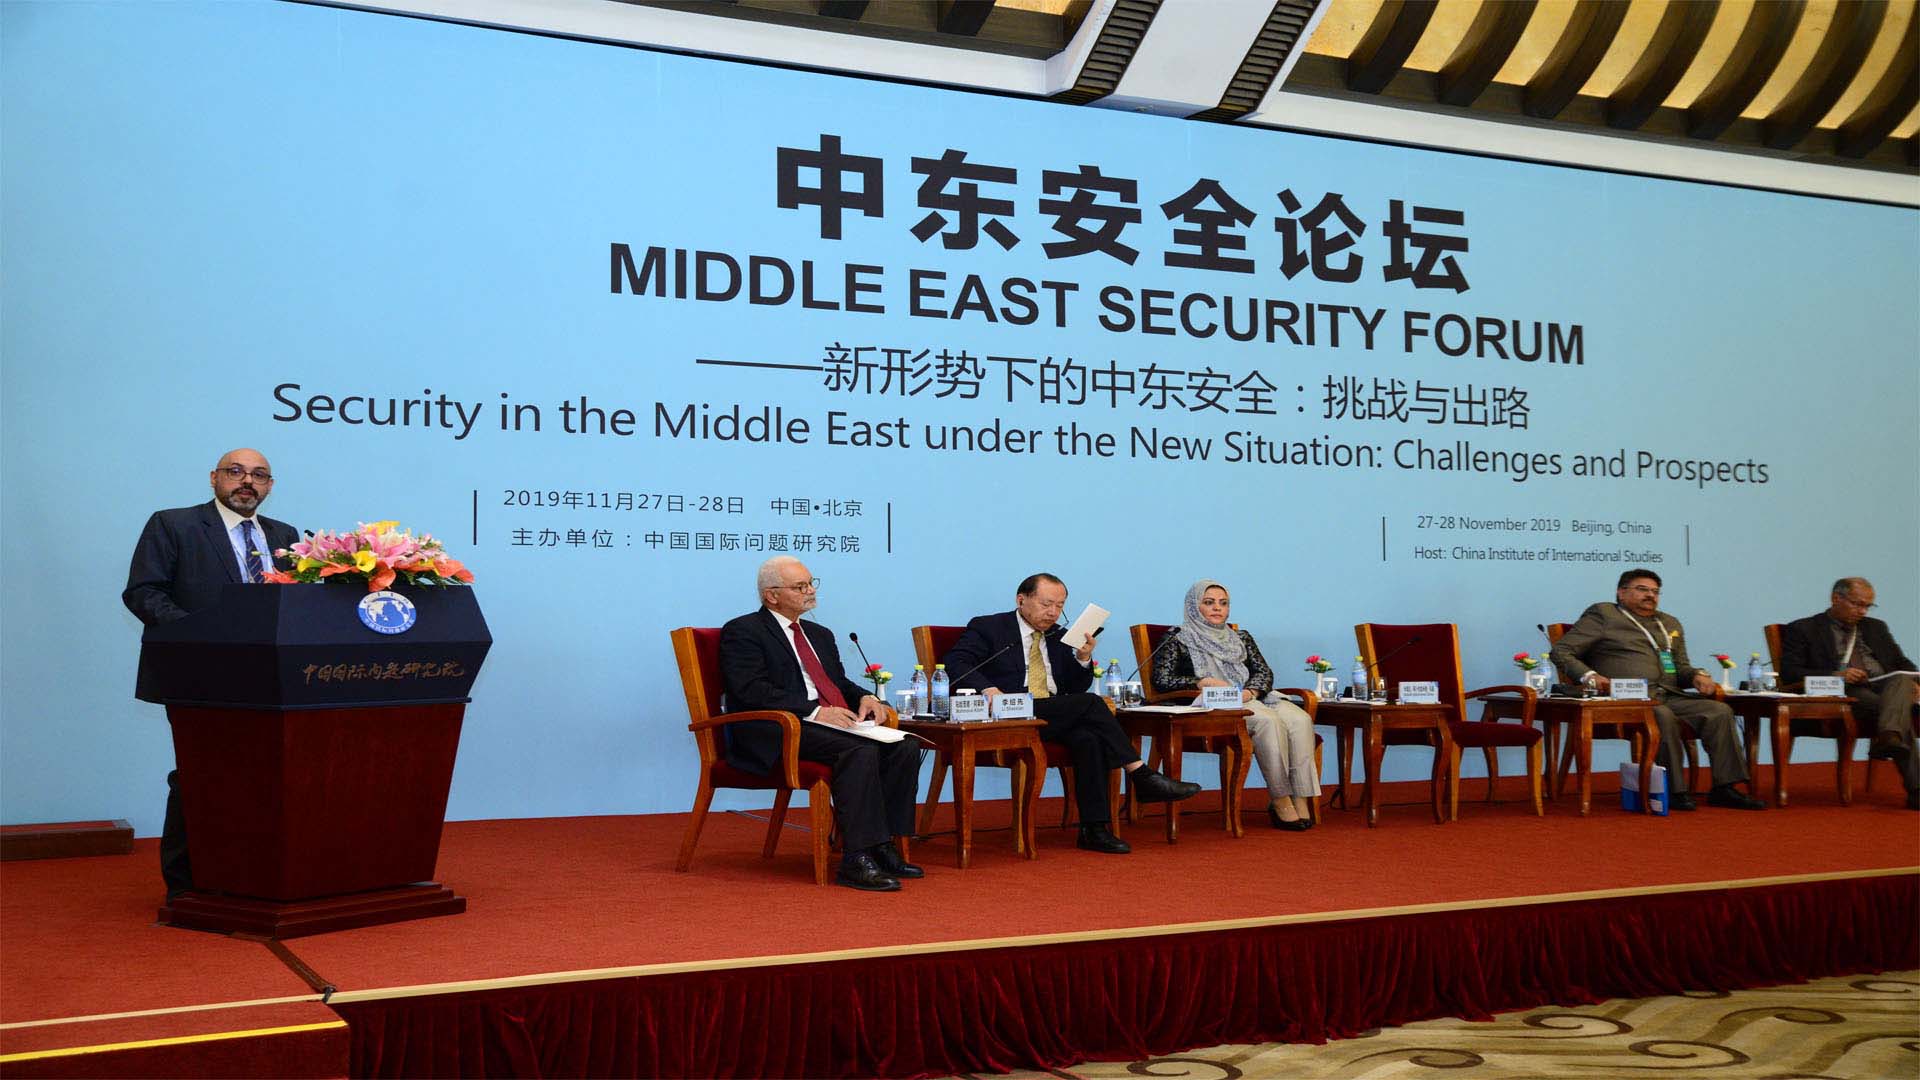 Security Forum & MOU with China Institute of International Studies